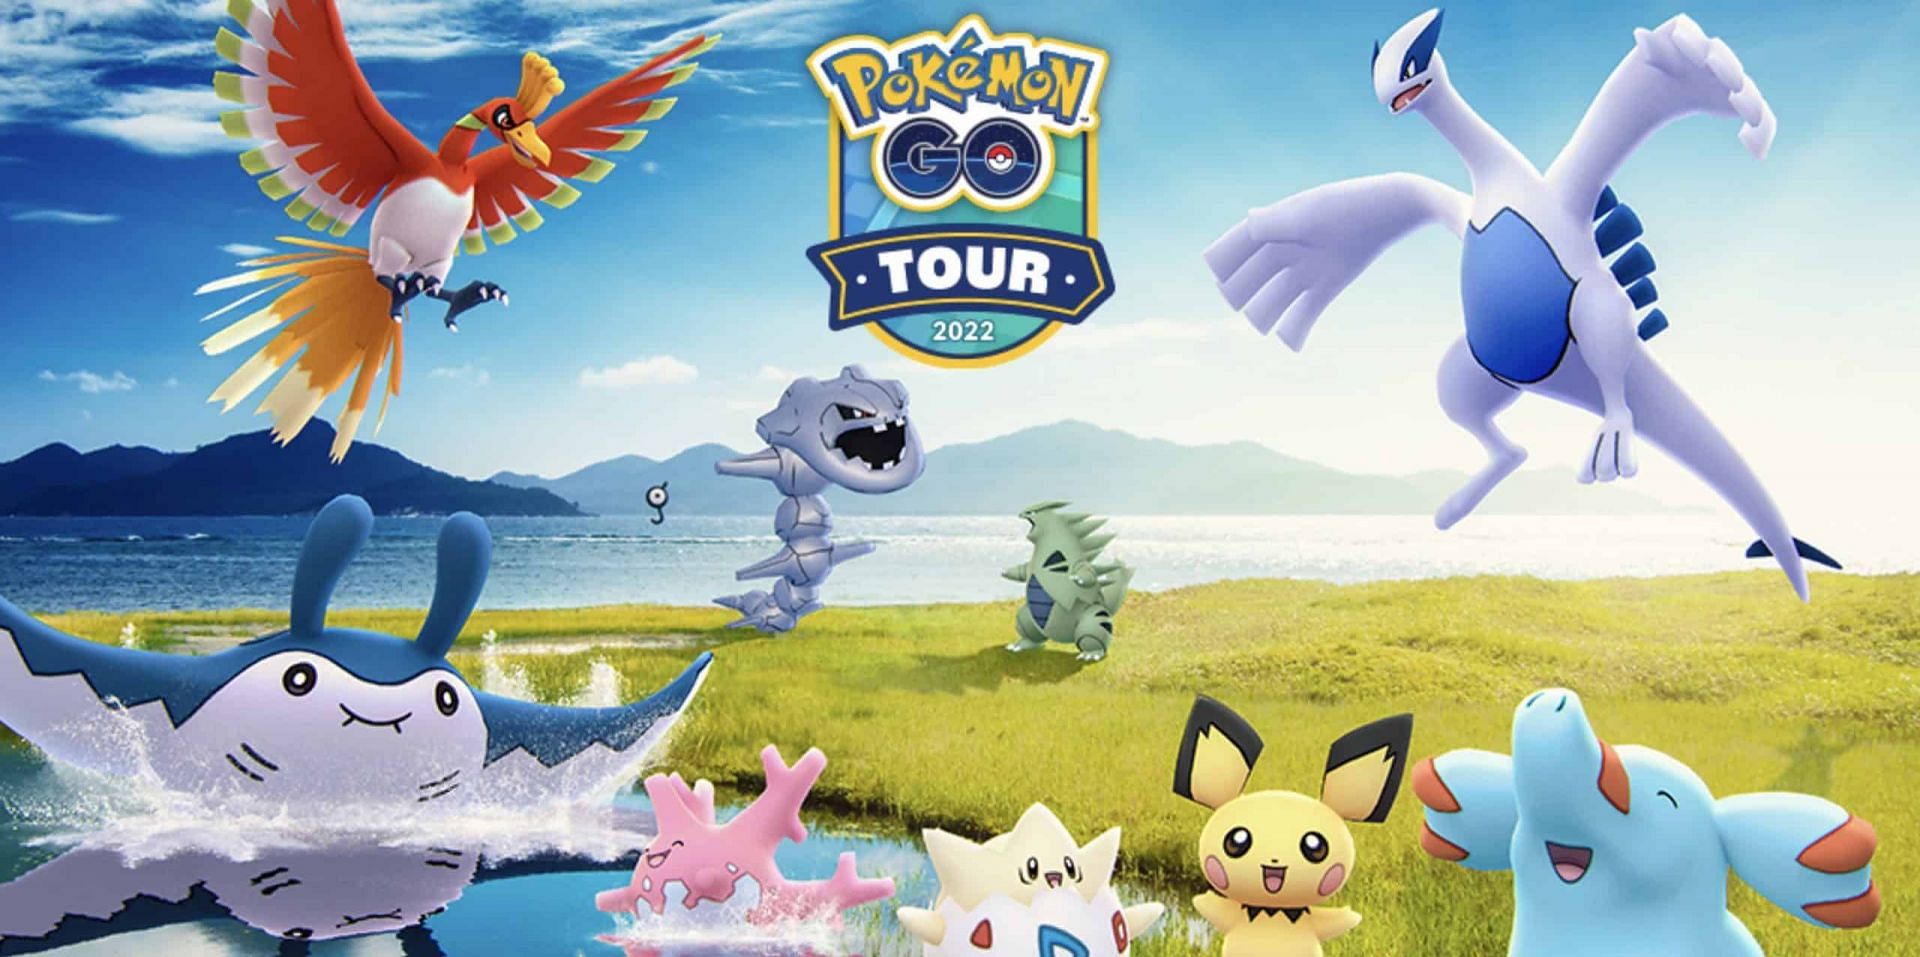 Pokemon GO&#039;s limited-time Tour event is back, this time focusing on the Gen II region of Johto (Image via Niantic)